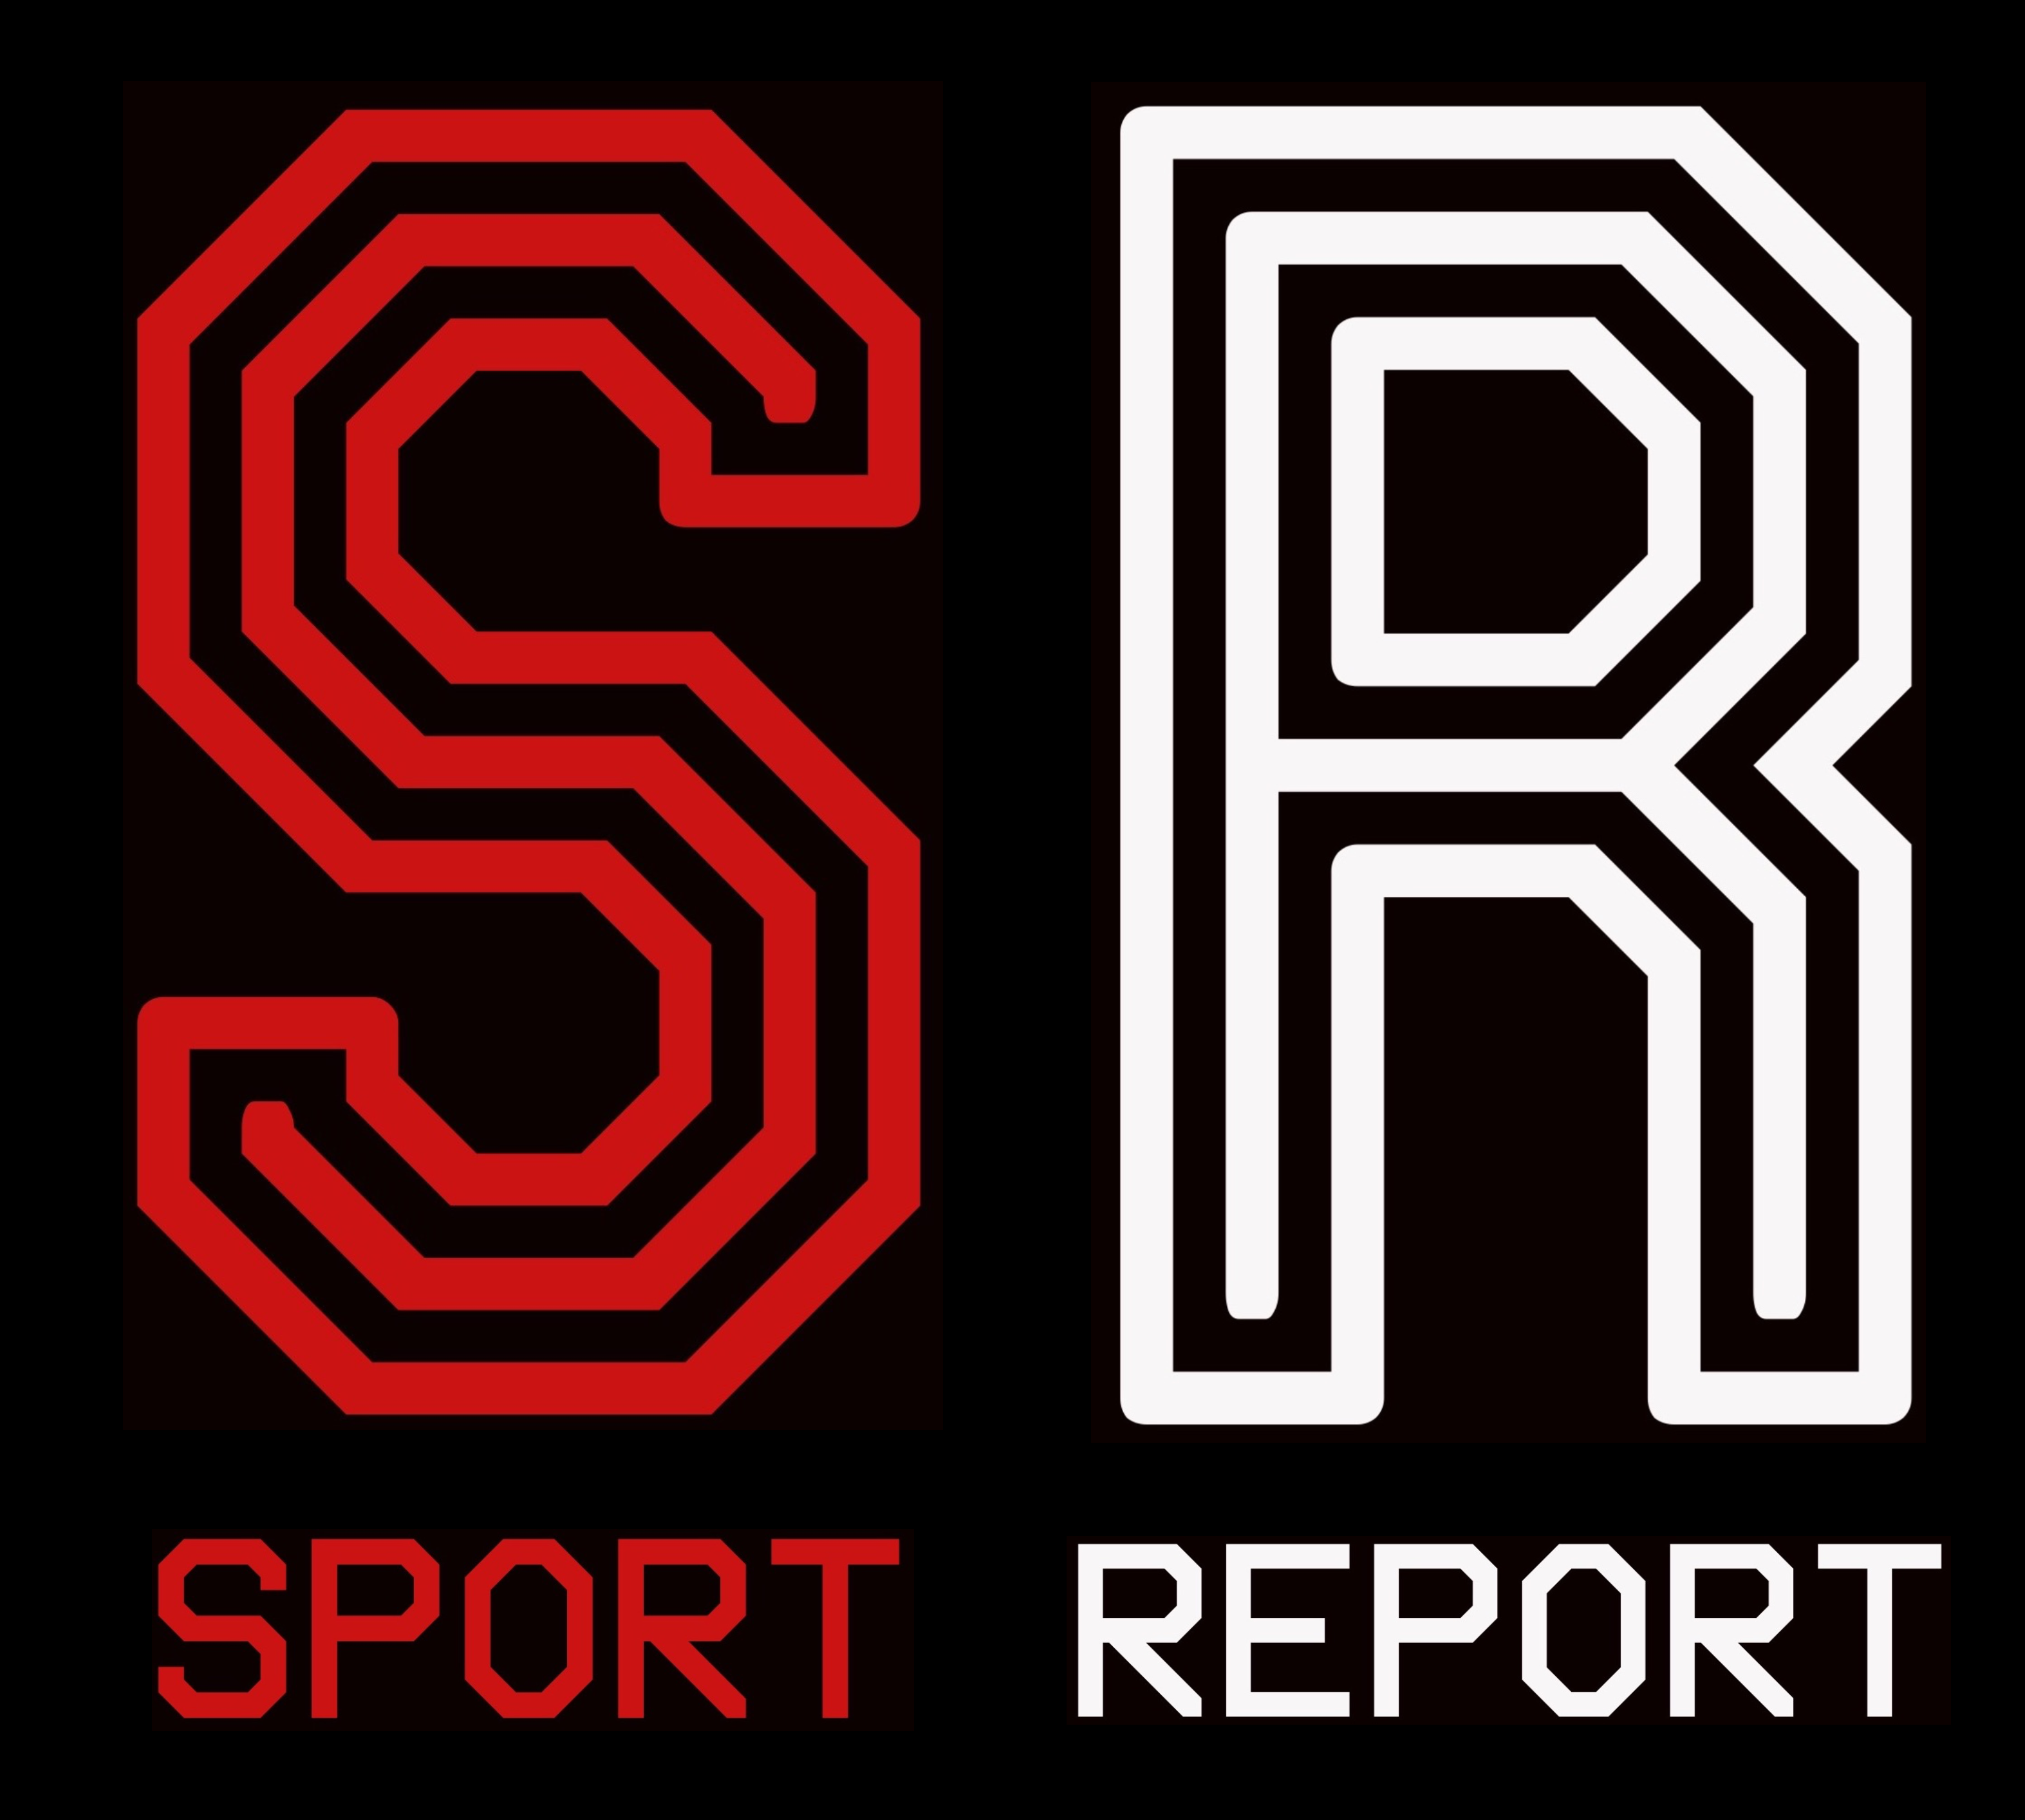 The Sport Report